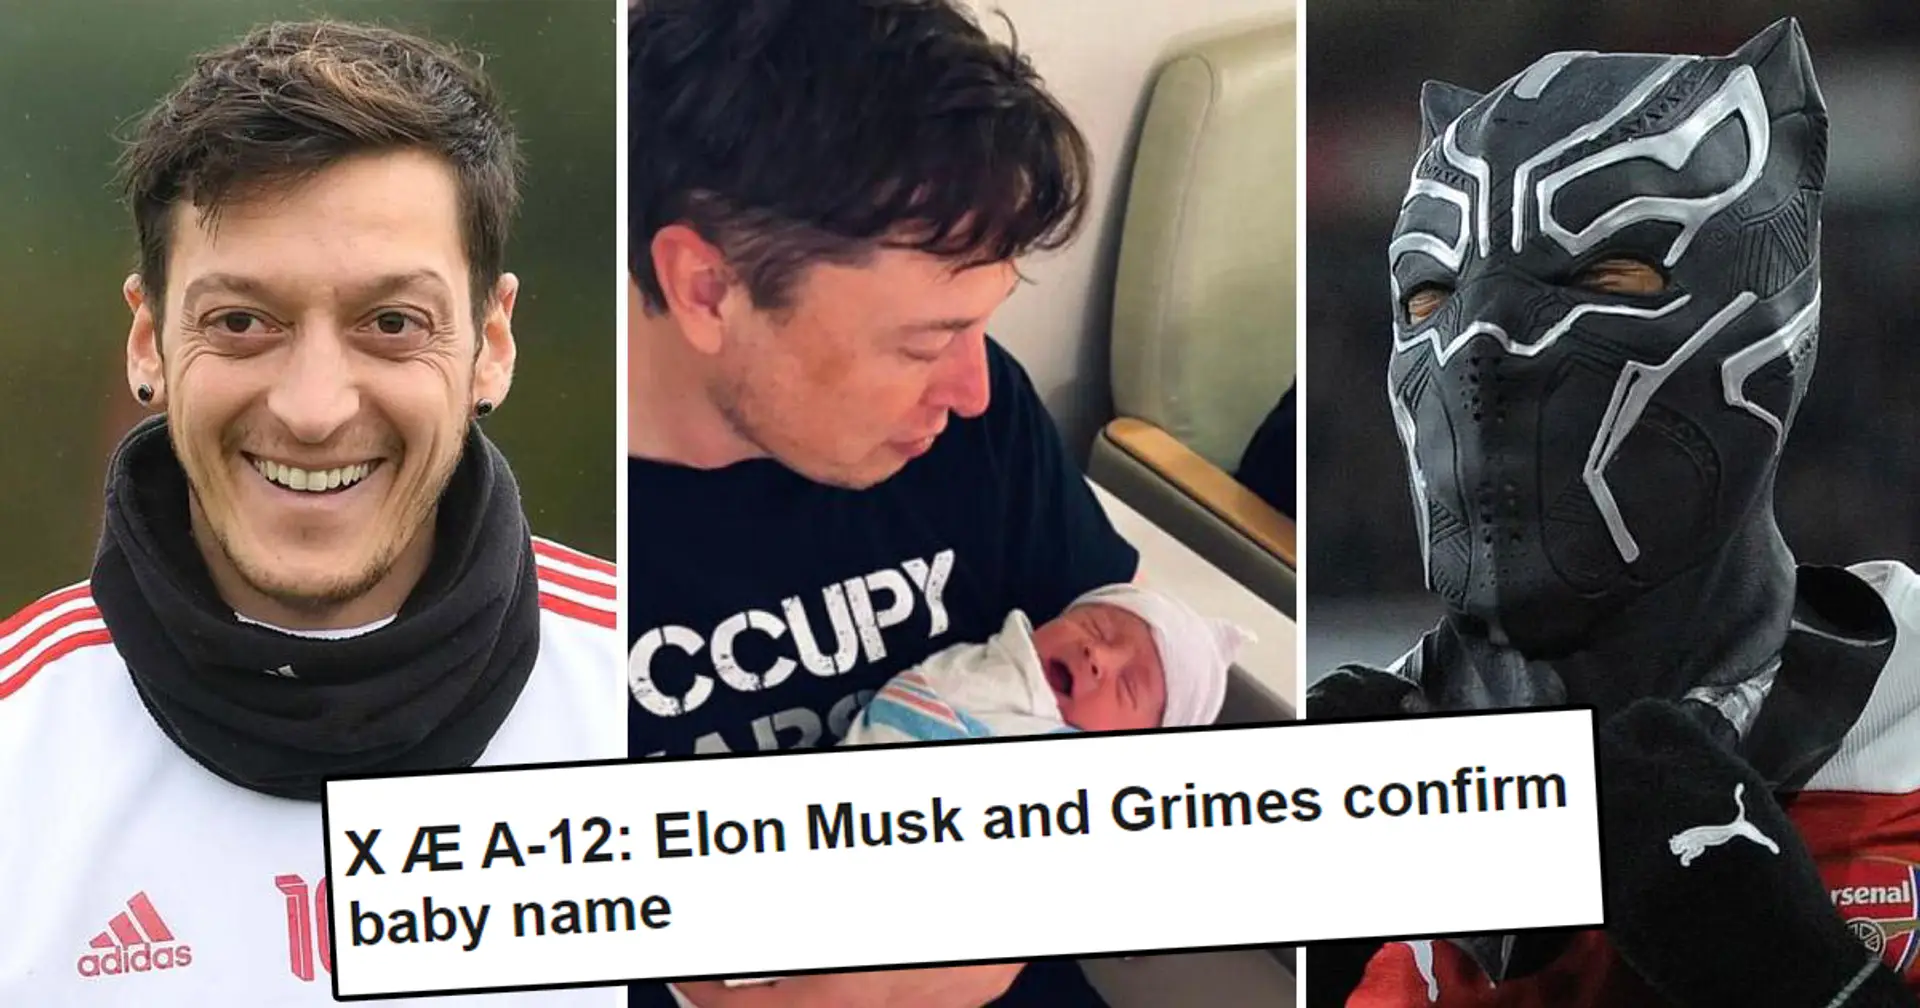 C Ö A-77 and V ¿ P-99: How would we call Arsenal players based on Elon Musk's naming customs